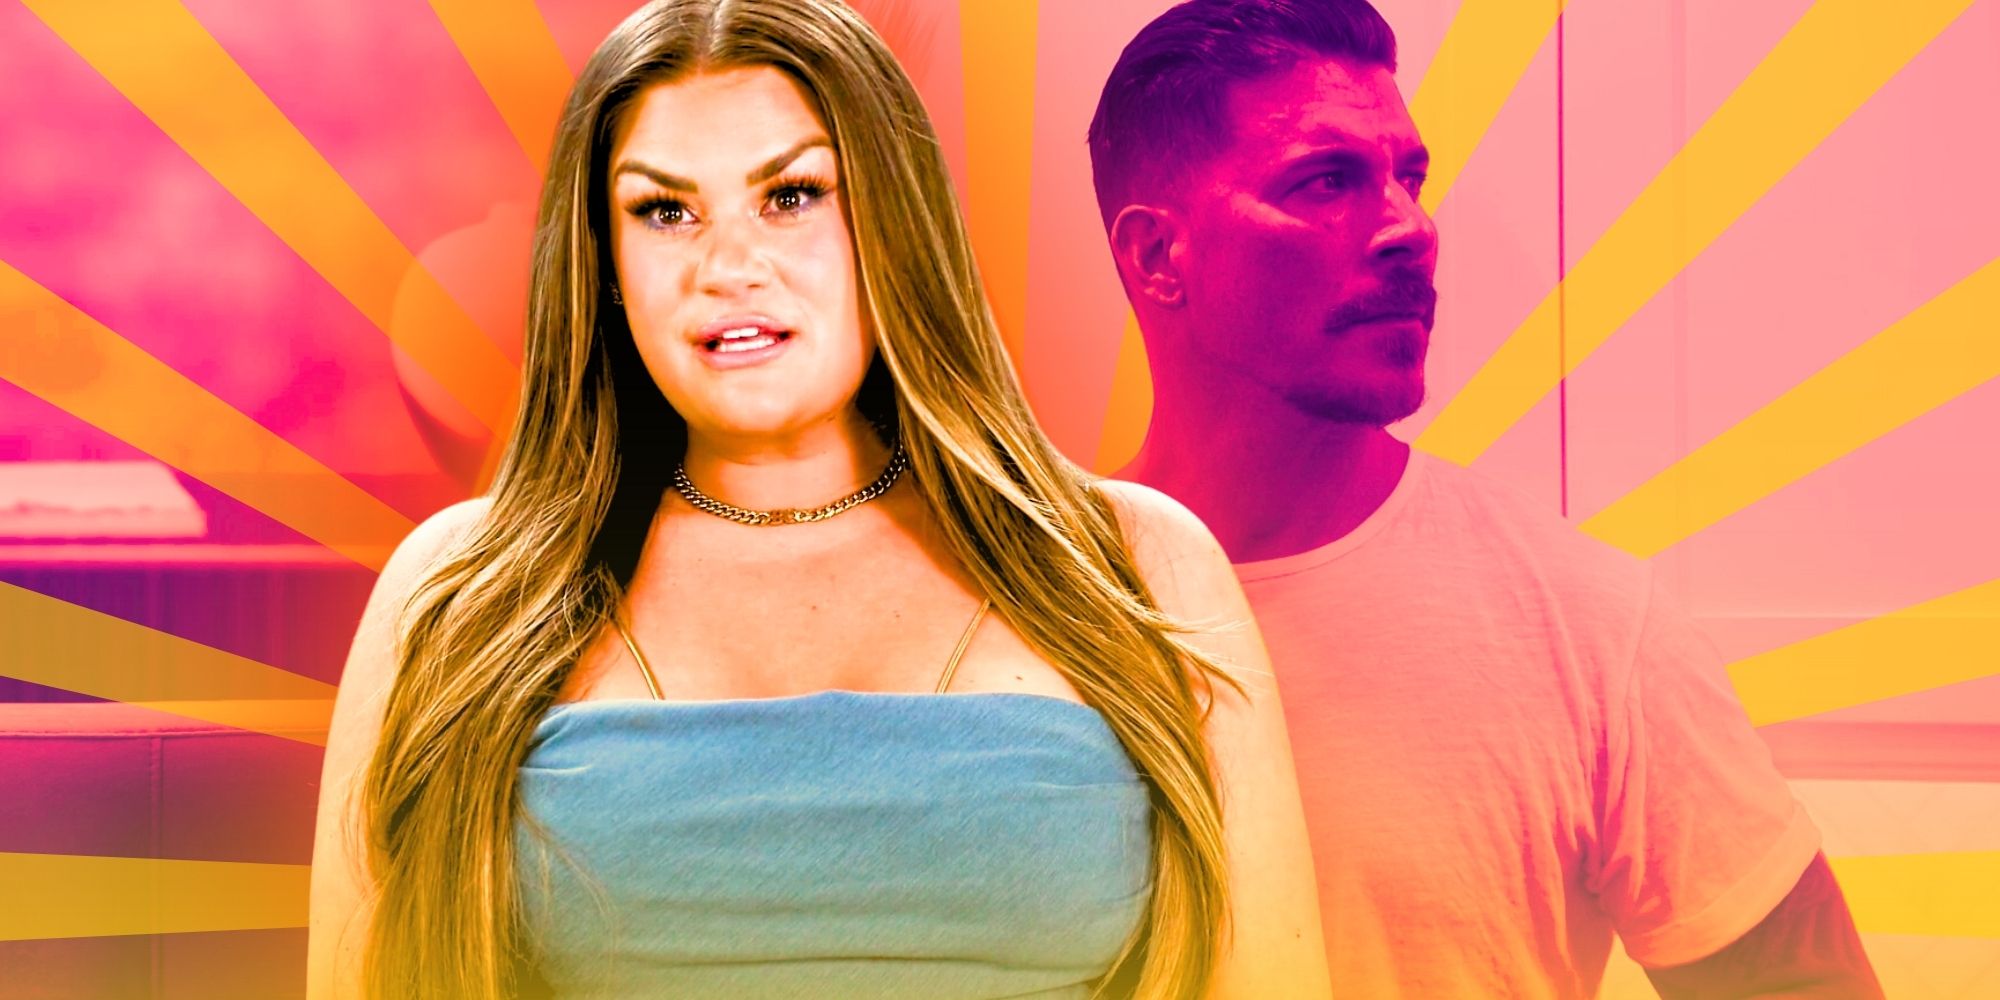 A montage of Brittany Cartwright and Jax Taylor looking concerned and angry.